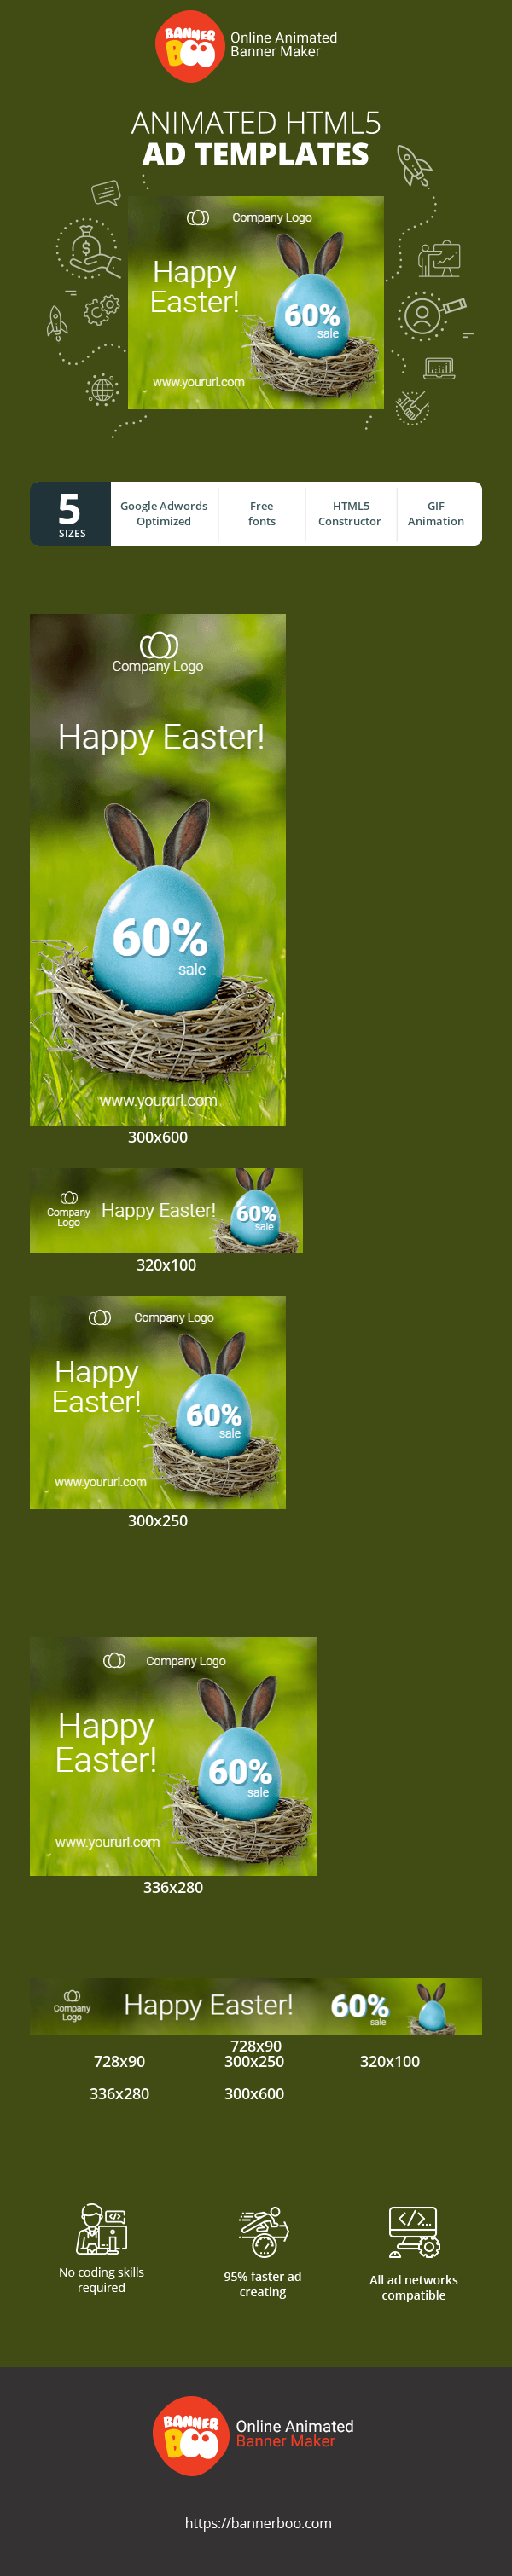 Banner ad template — Happy Easter — 60% Sale!